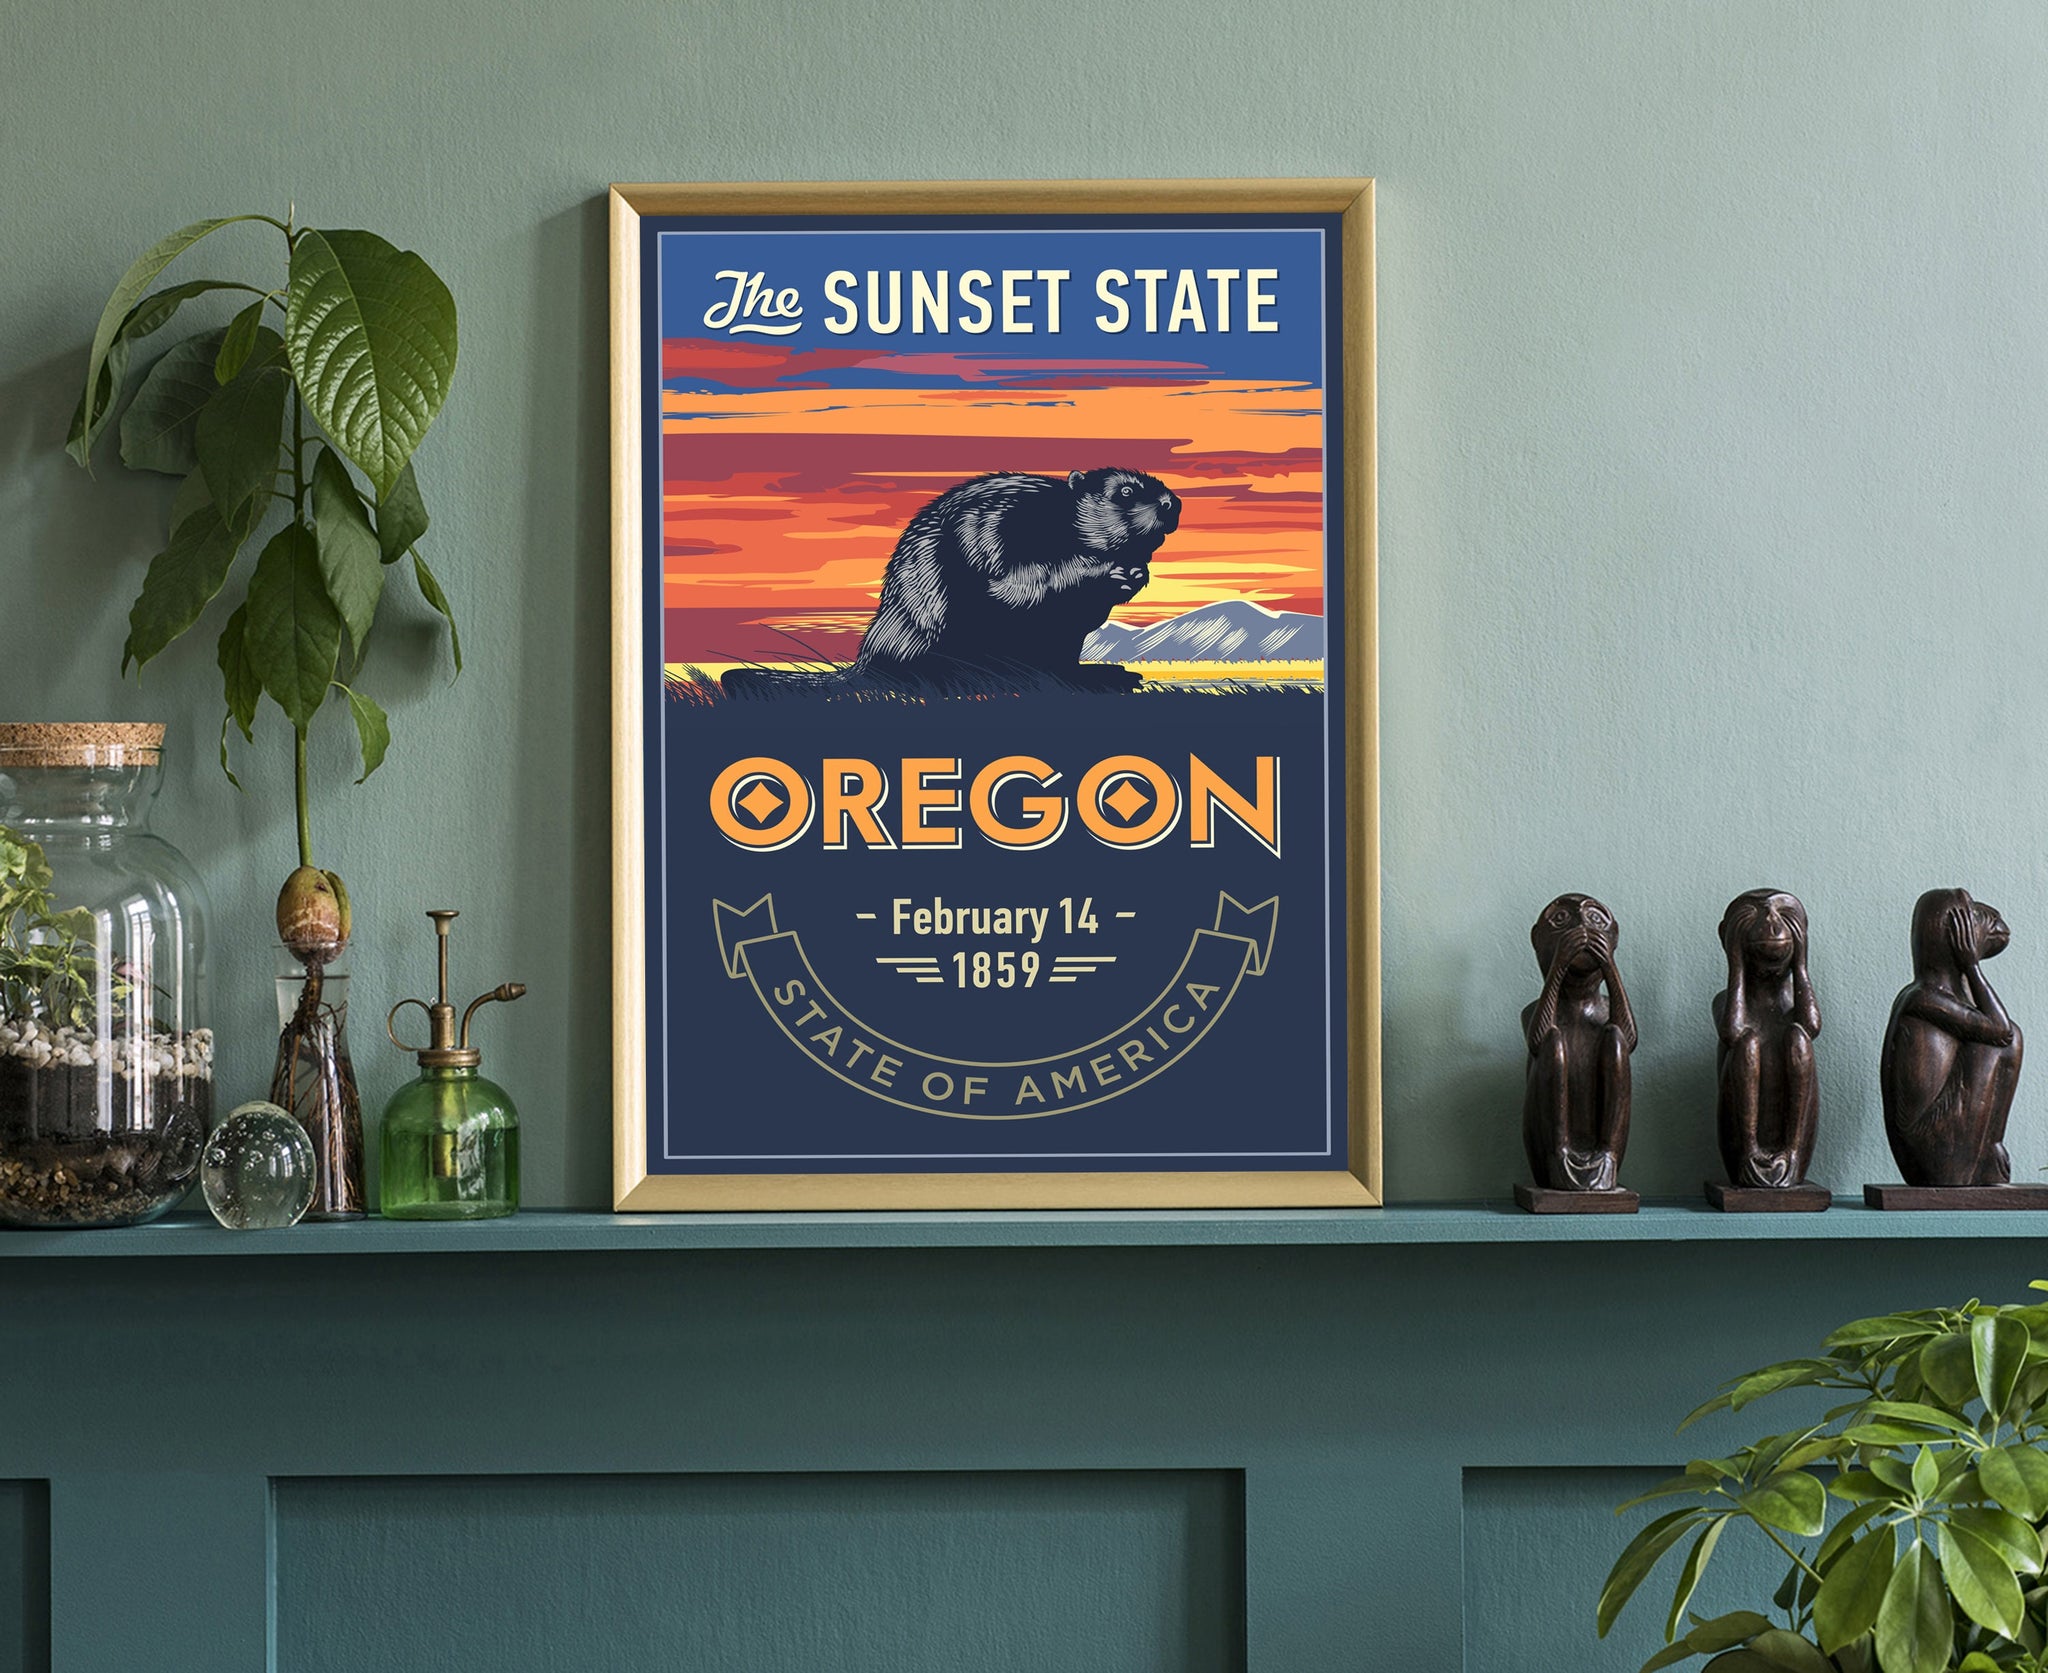 United States Poster, Oklahoma State Poster Print, Oklahoma State Emblem Poster, Retro Travel State Poster, Home Wall Art, Office Wall Art